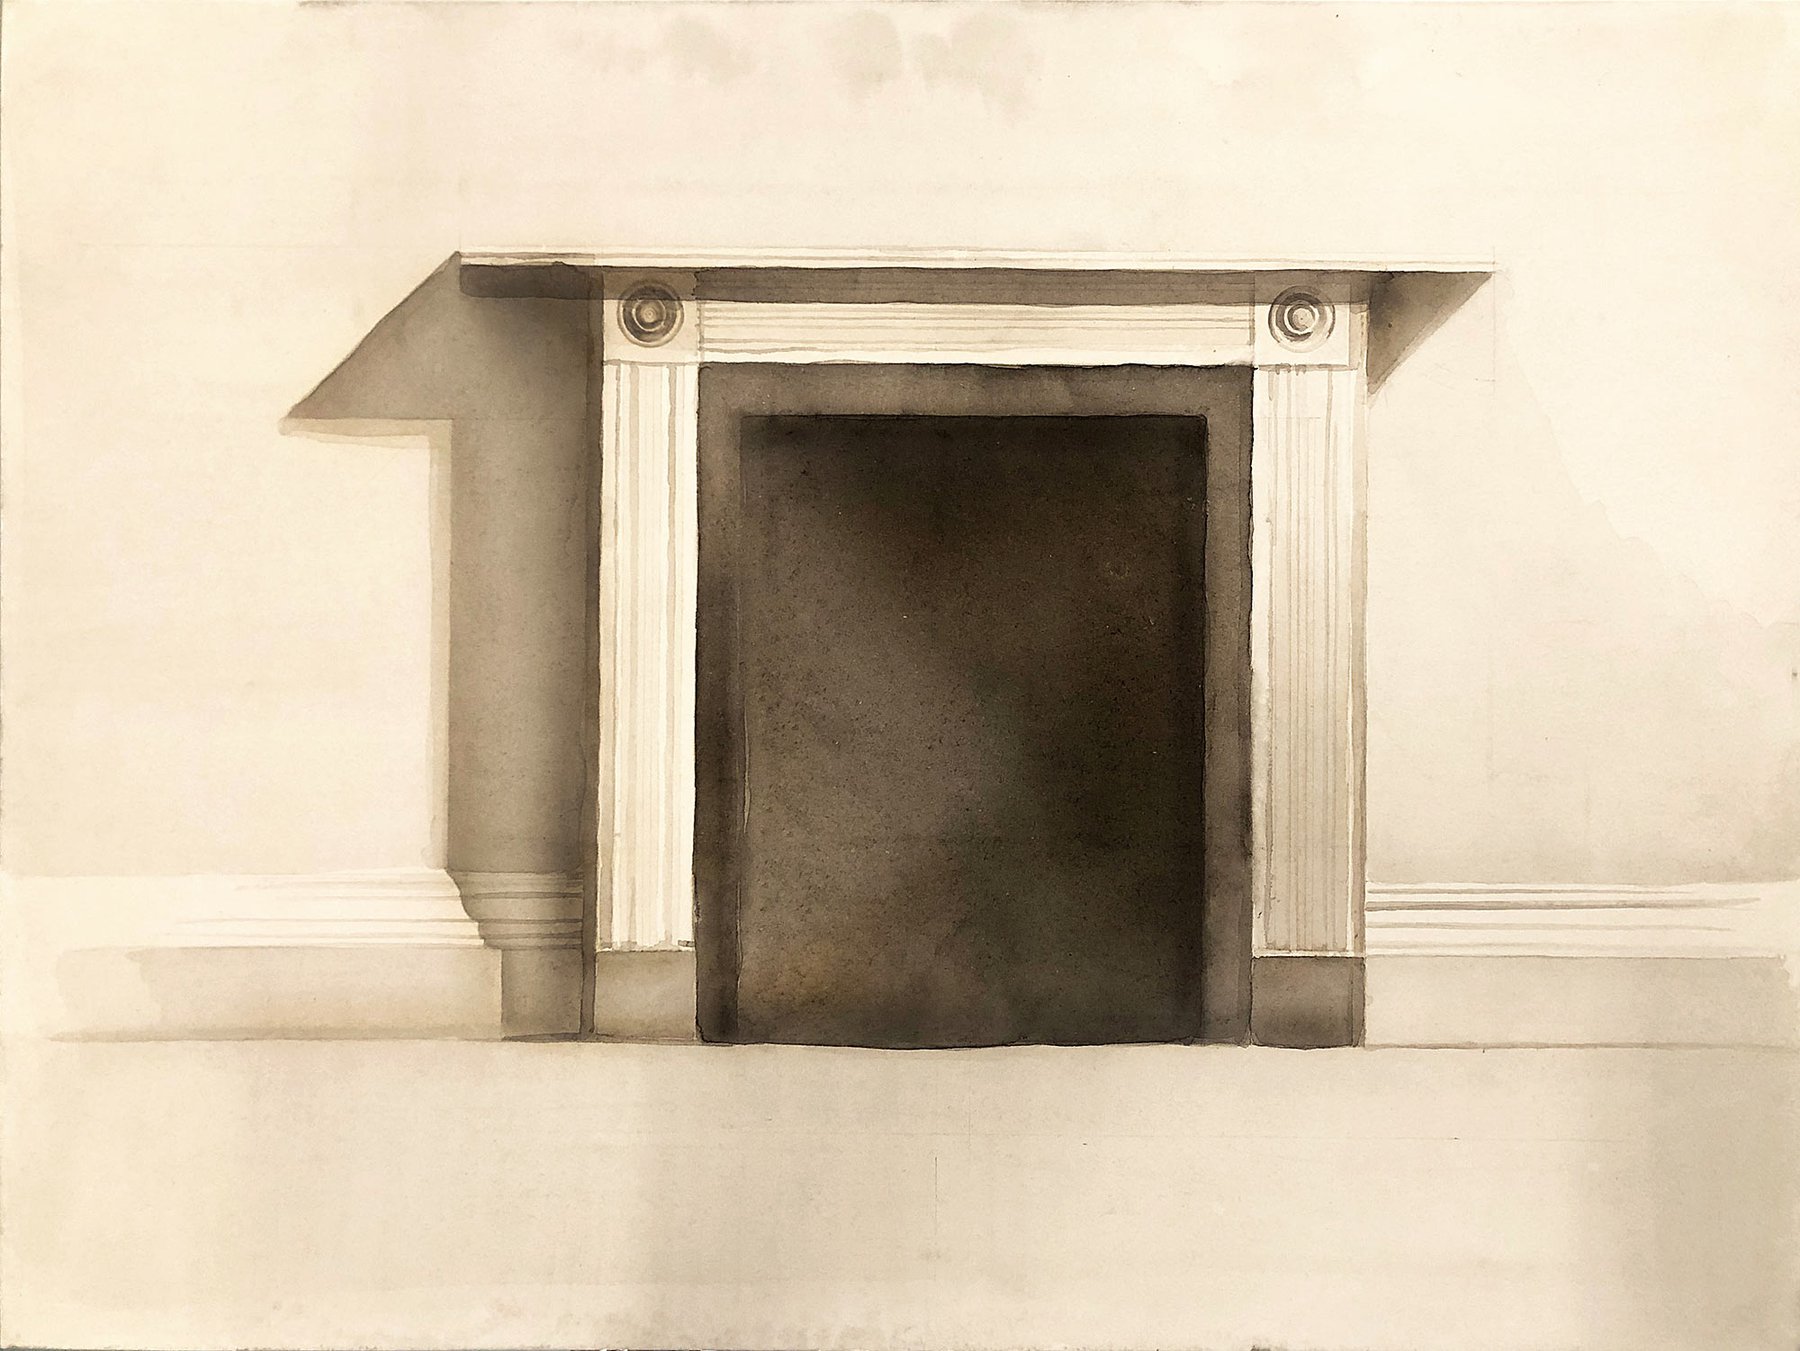 An drawing of a fireplace coloured in a soft range of brown inks, to simulate light and shadows. The fireplace is a typical white mantelpiece as in most UK terrace houses